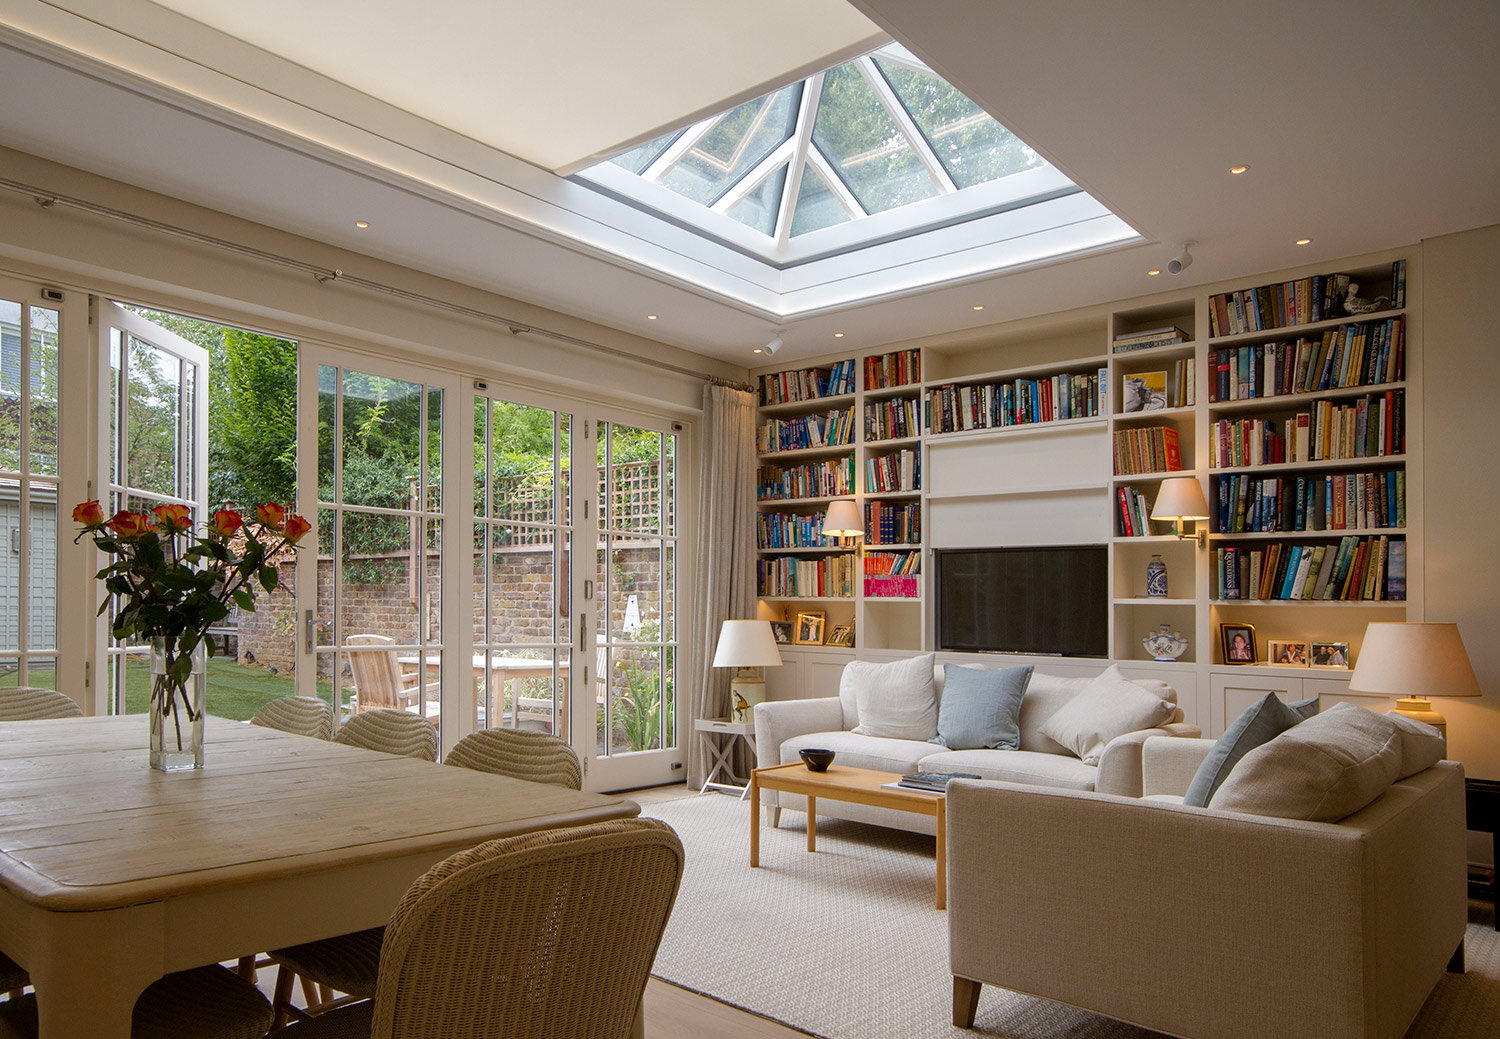 Electric Roof Blinds Winchester. Finding electric window coverings for roof lanterns and sky lights can prove difficult. We have a number of motorised solutions.